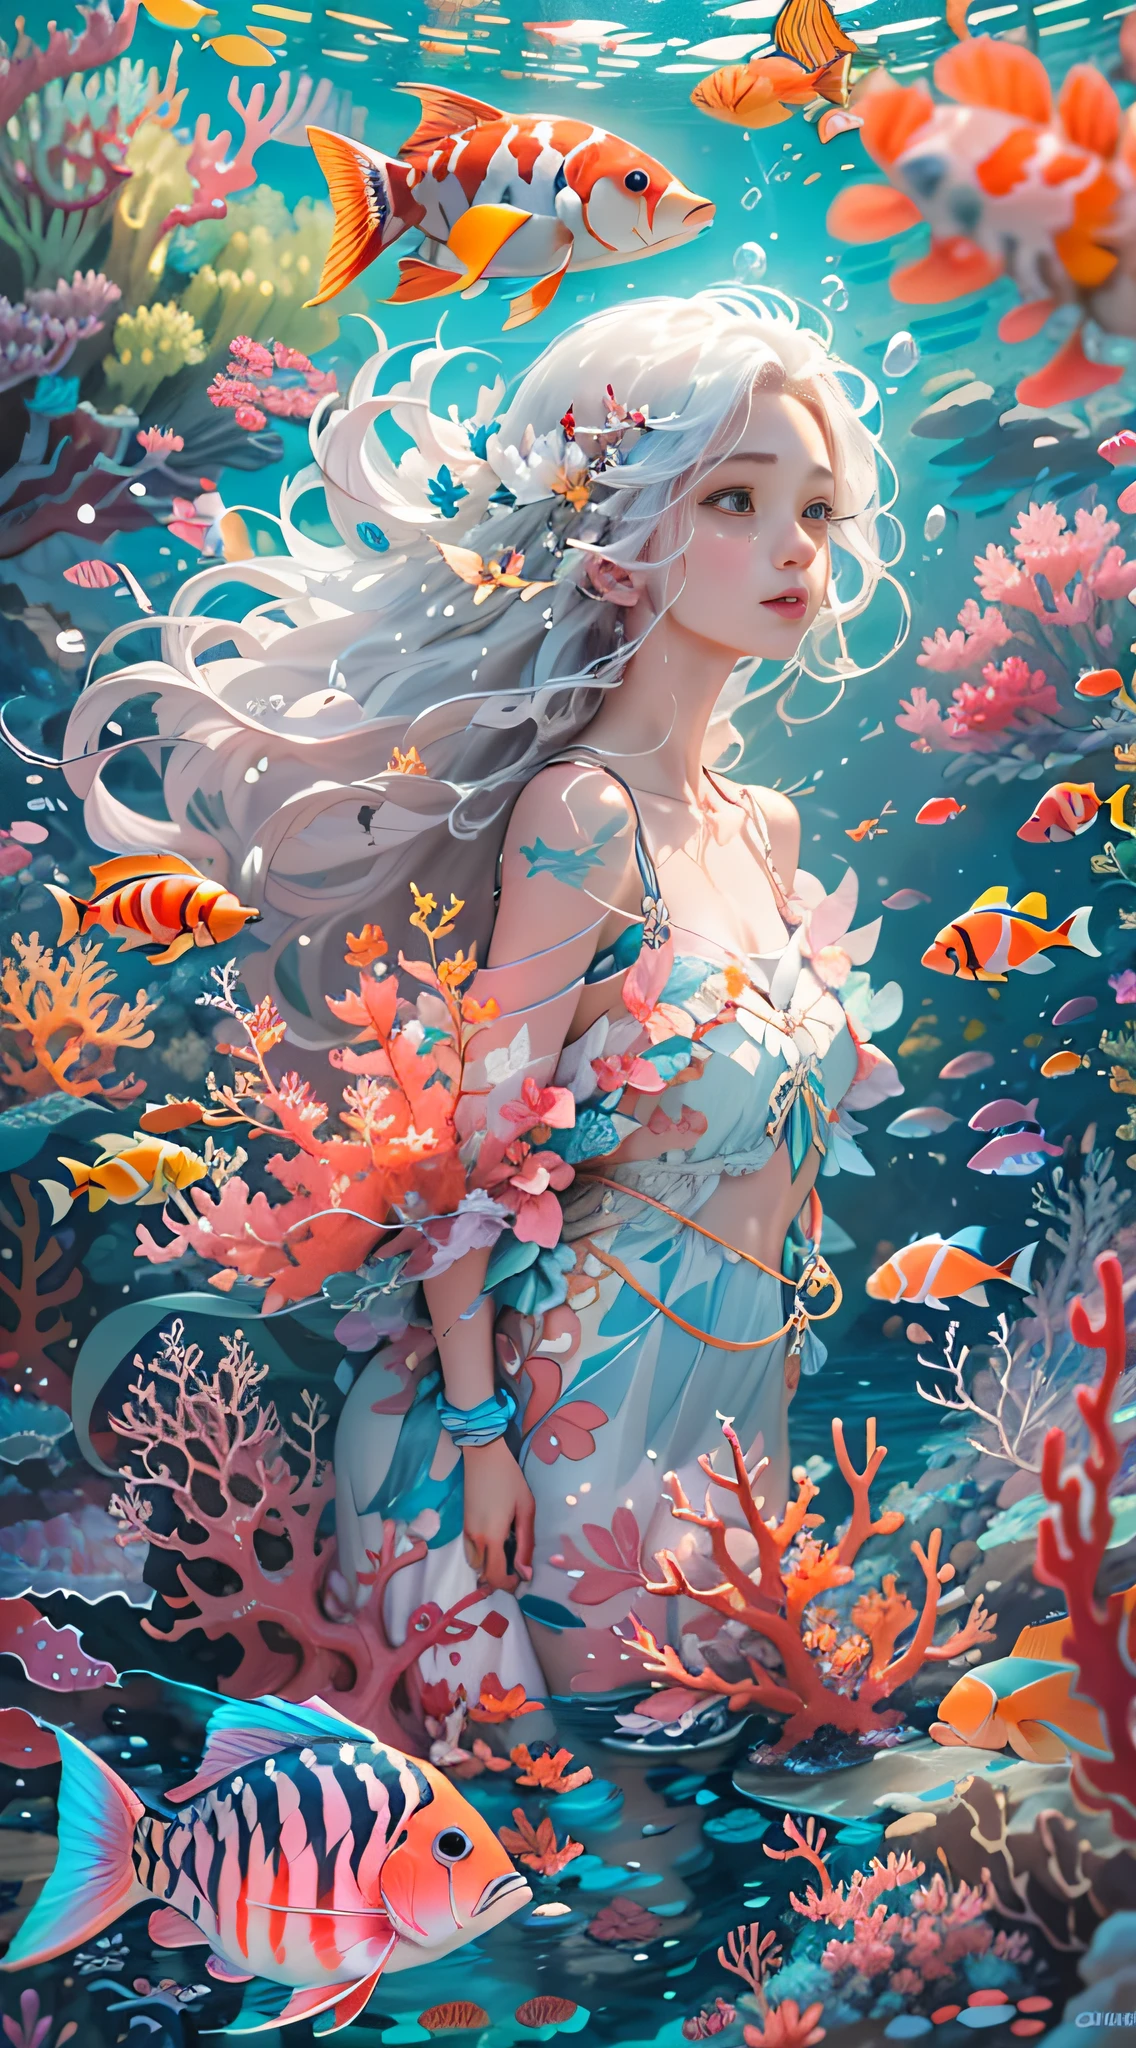 Conceptual art of marine life, Undersea landscape, Marine life，Beautiful coral reefs come in different shapes, 。.3D，, Fish, Female animated fantasy illustration. Long white hair scattered in the sea, Drift, Very harmonious. The whole painting adopts a messy and imaginative painting style. The colors are bright and saturated, line sleek. The mystery and beauty of the ocean, The painting depicts an underwater world full of life and vitality, Animated art wallpaper 8 K